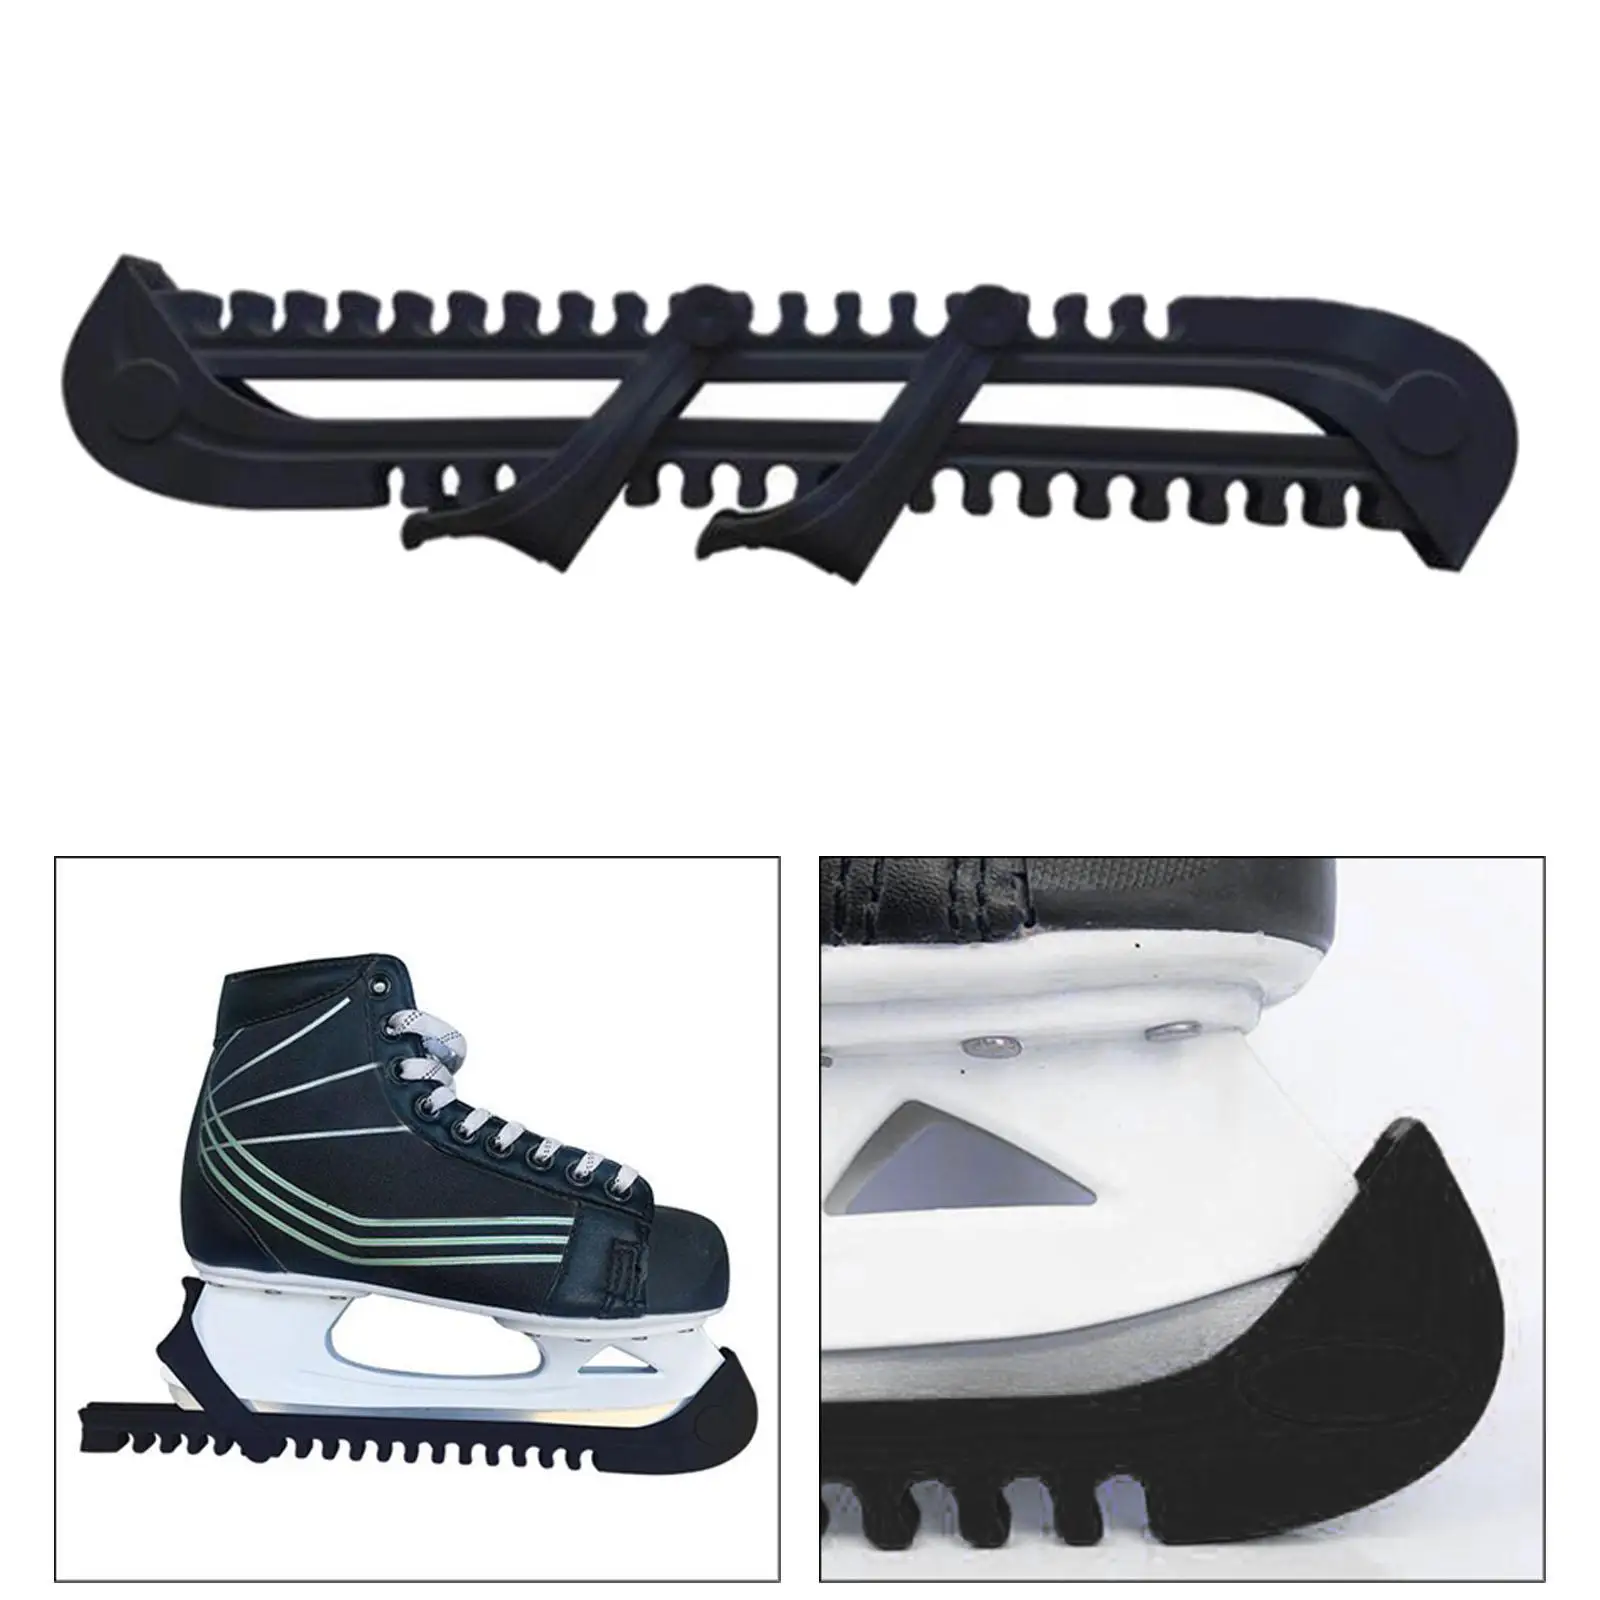 Flexible Skates Accessories Blade Covers Protective Ice Skates